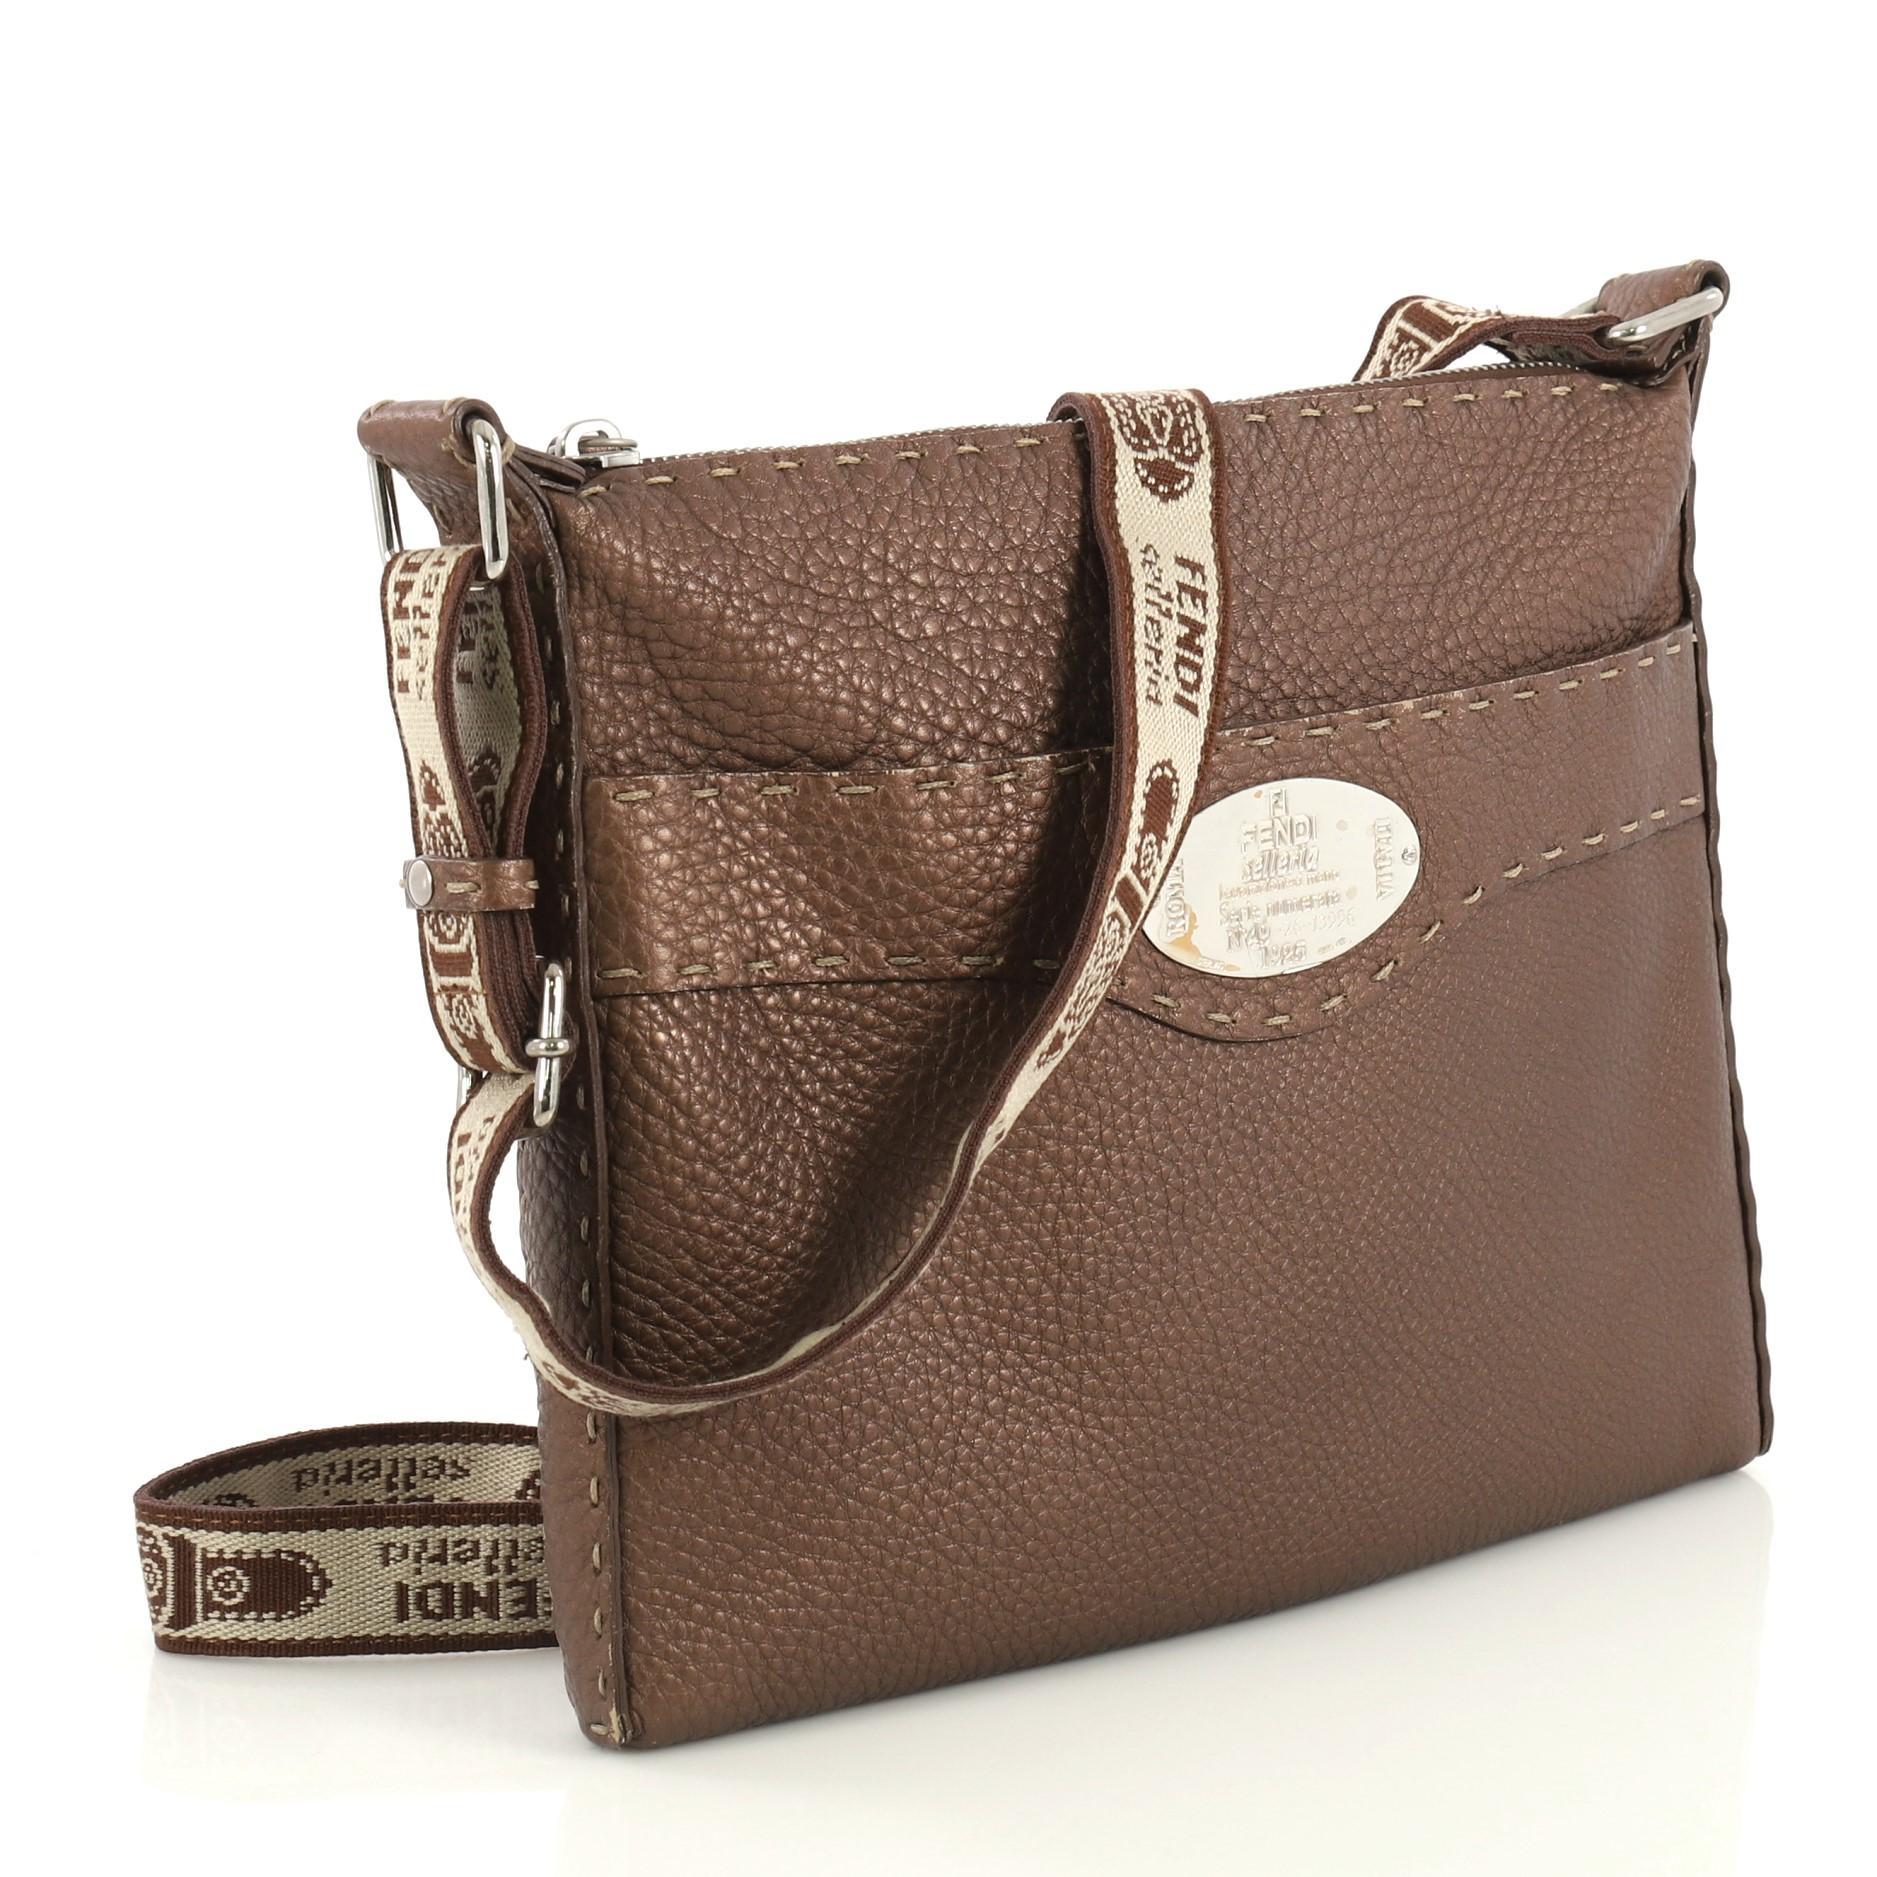 This Fendi Selleria Crossbody Bag Leather Small, crafted in brown leather, features an adjustable crossbody strap and silver-tone hardware. Its zip closure opens to a brown fabric interior with zip pocket. 

Condition: Very good. Moderate wear on